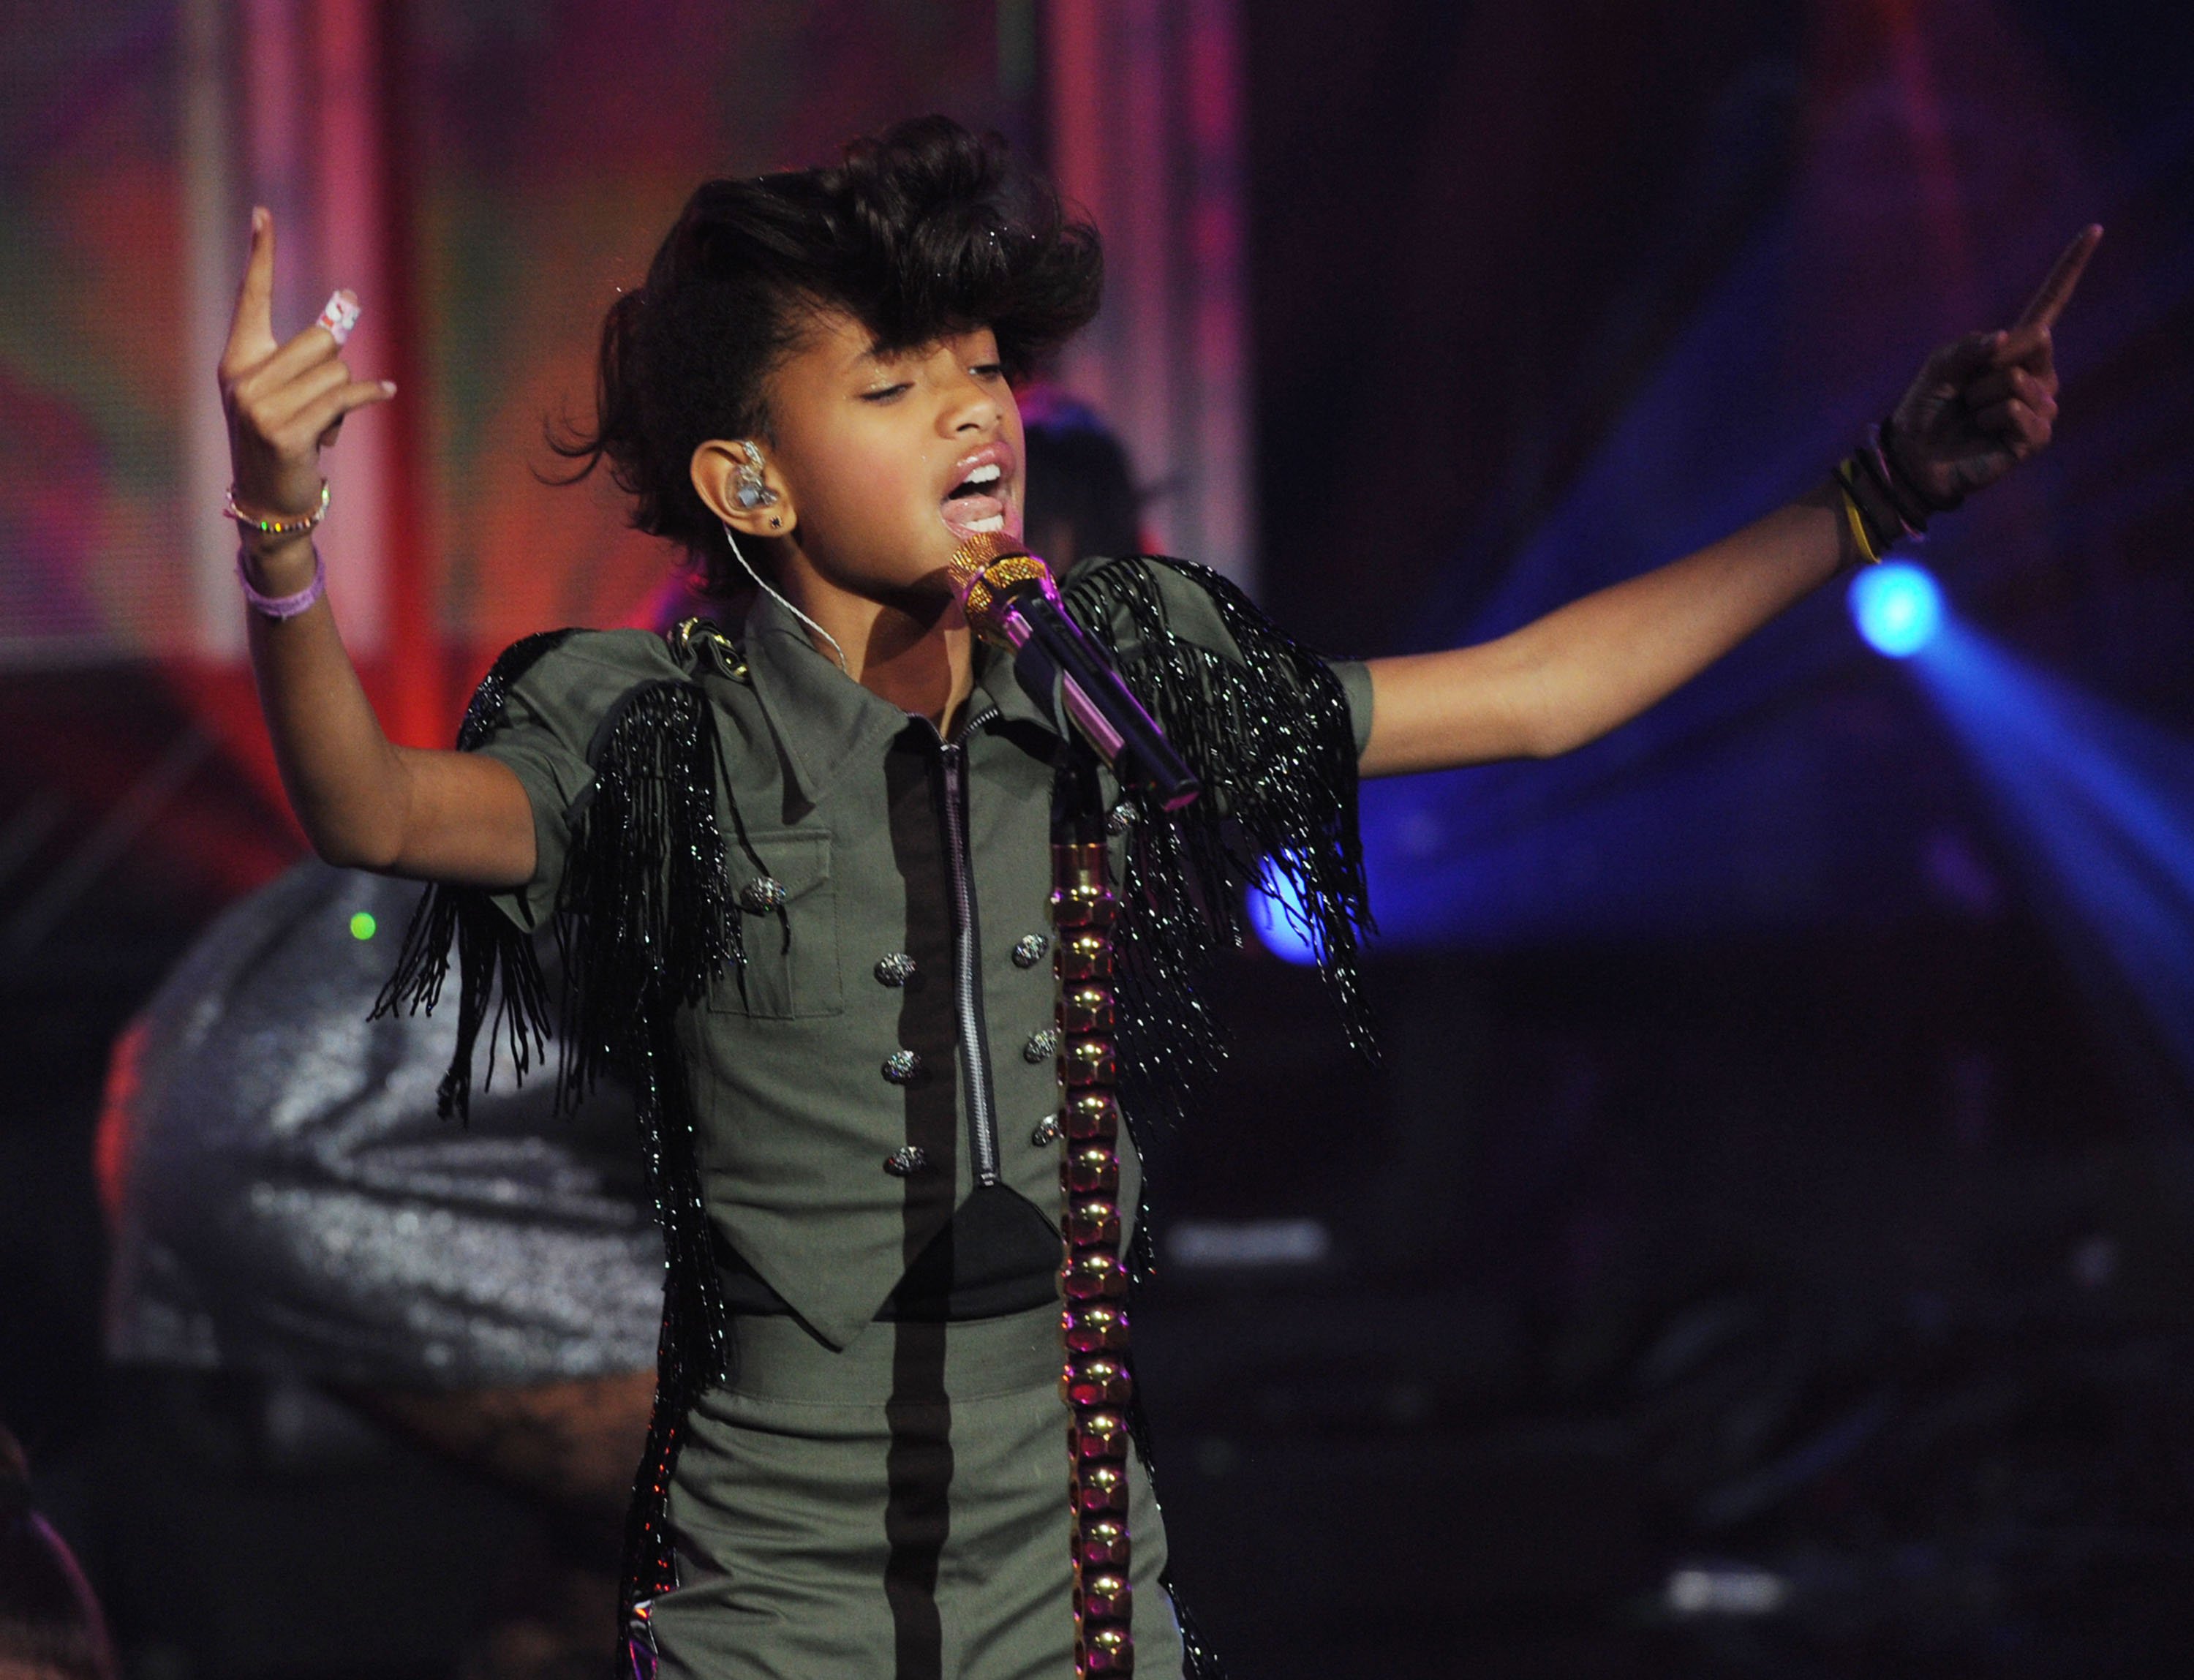 Willow Smith performs onstage during Dick Clark's New Year's Rockin' Eve With Ryan Seacrest 2011 at Center Staging on December 31, 2010 in Burbank, California.